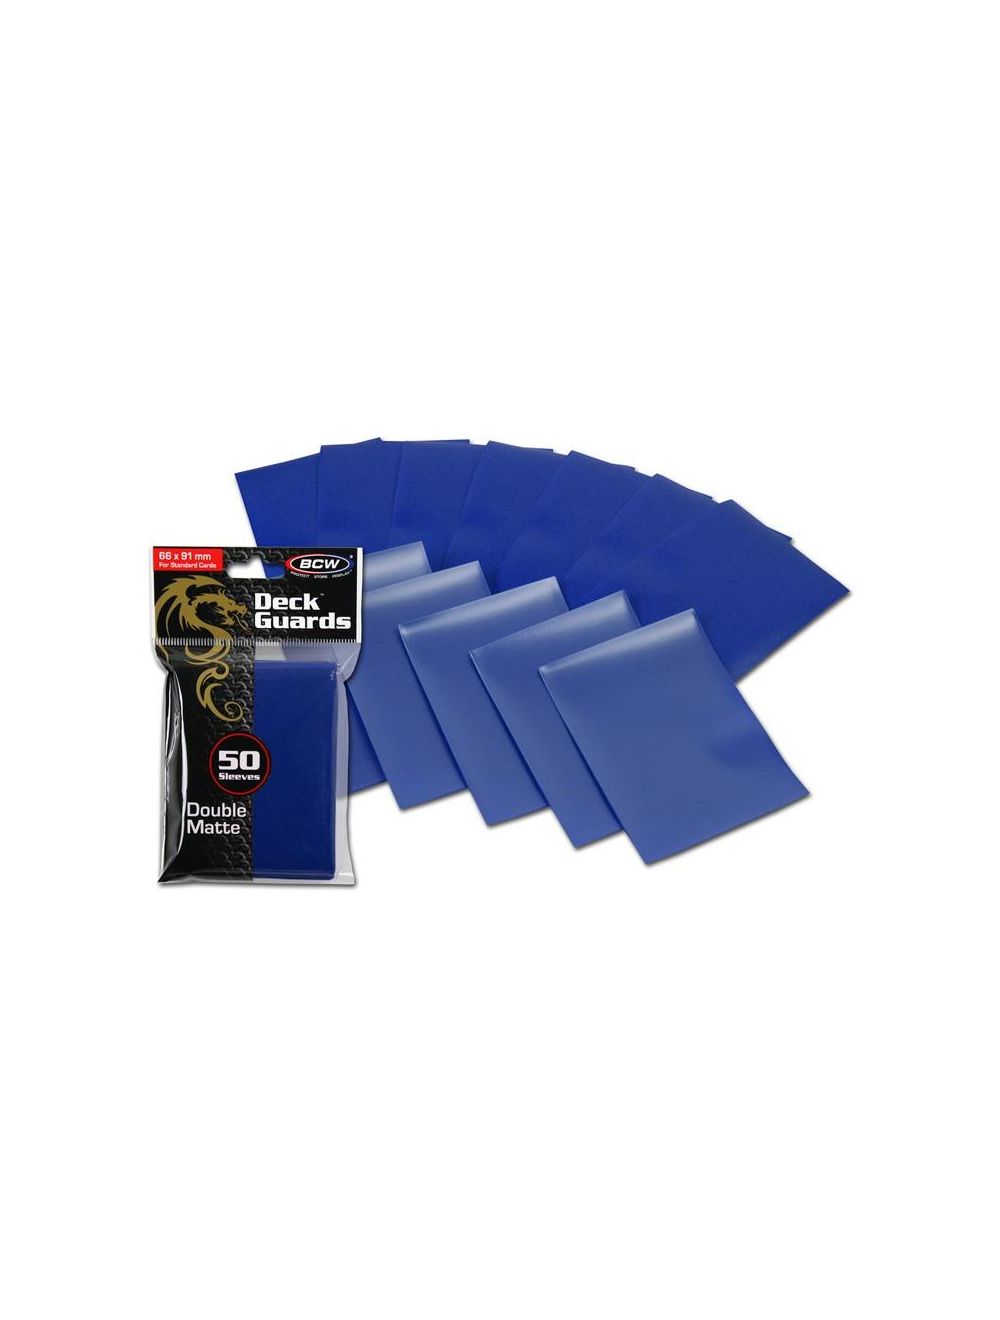 RED - MATTE SLEEVES 100 BCW GAMING DECK GUARD 